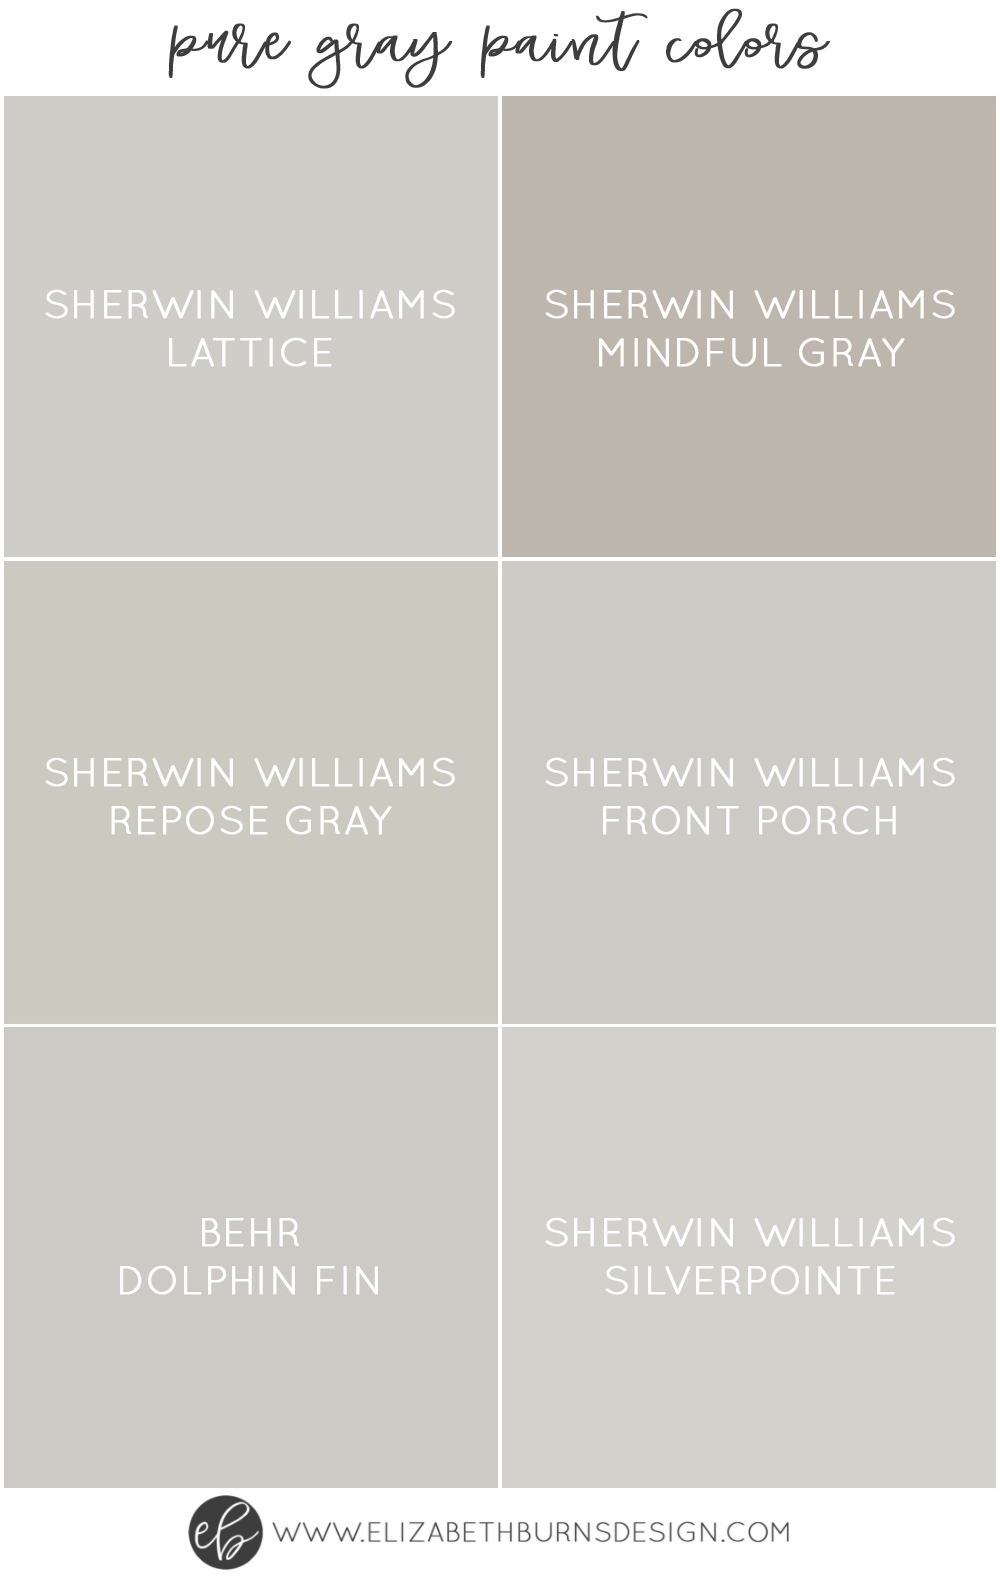 The Best Pure Grey Paint Colors Paint Guide Elizabeth Burns Design Raleigh Nc Interior Designer,English Country Cottage Decorating Ideas